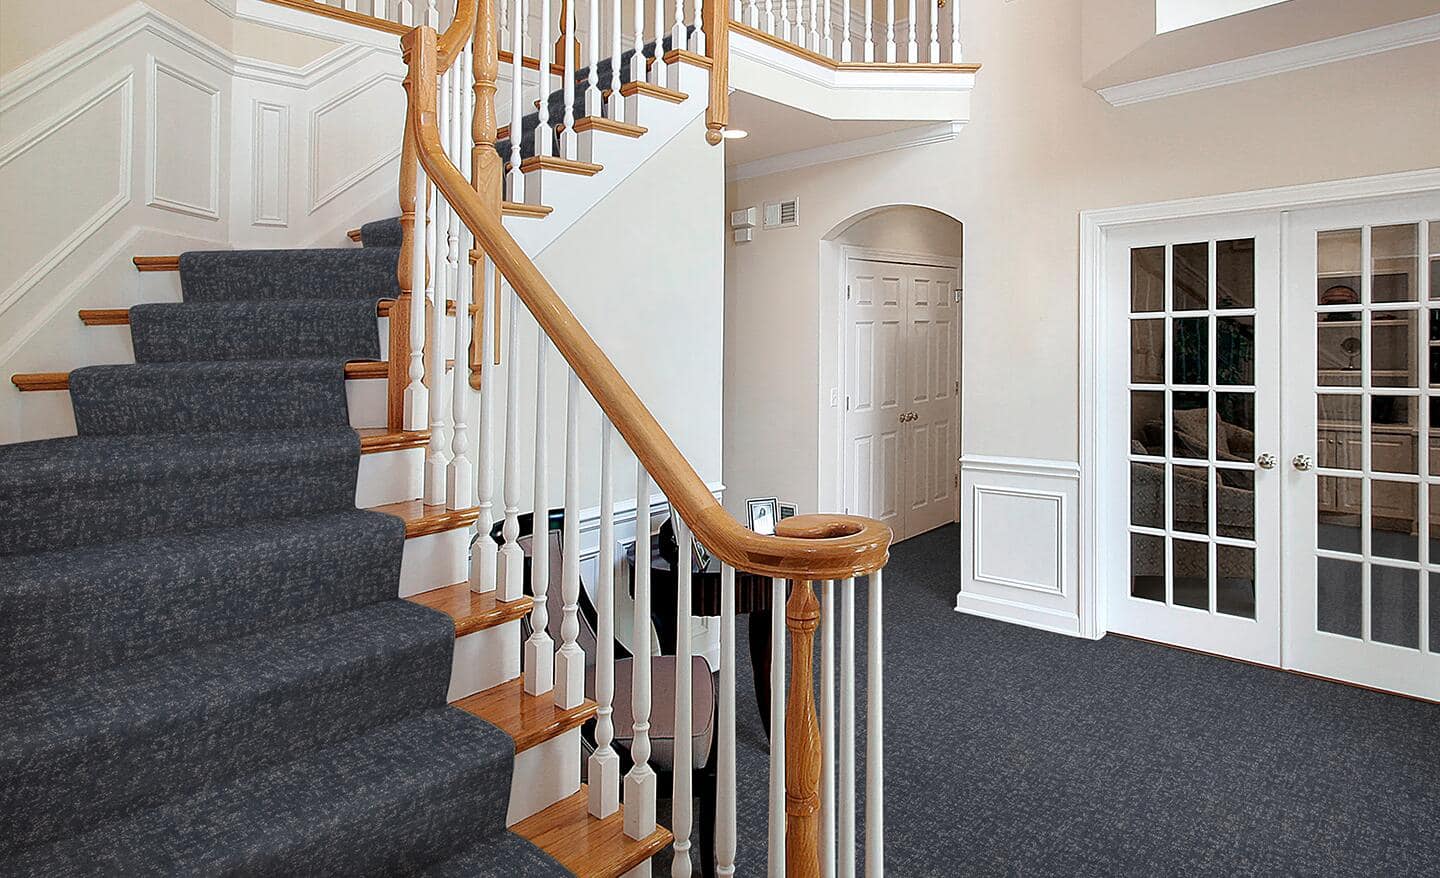 A blue stair runner installed on a flight of stairs.